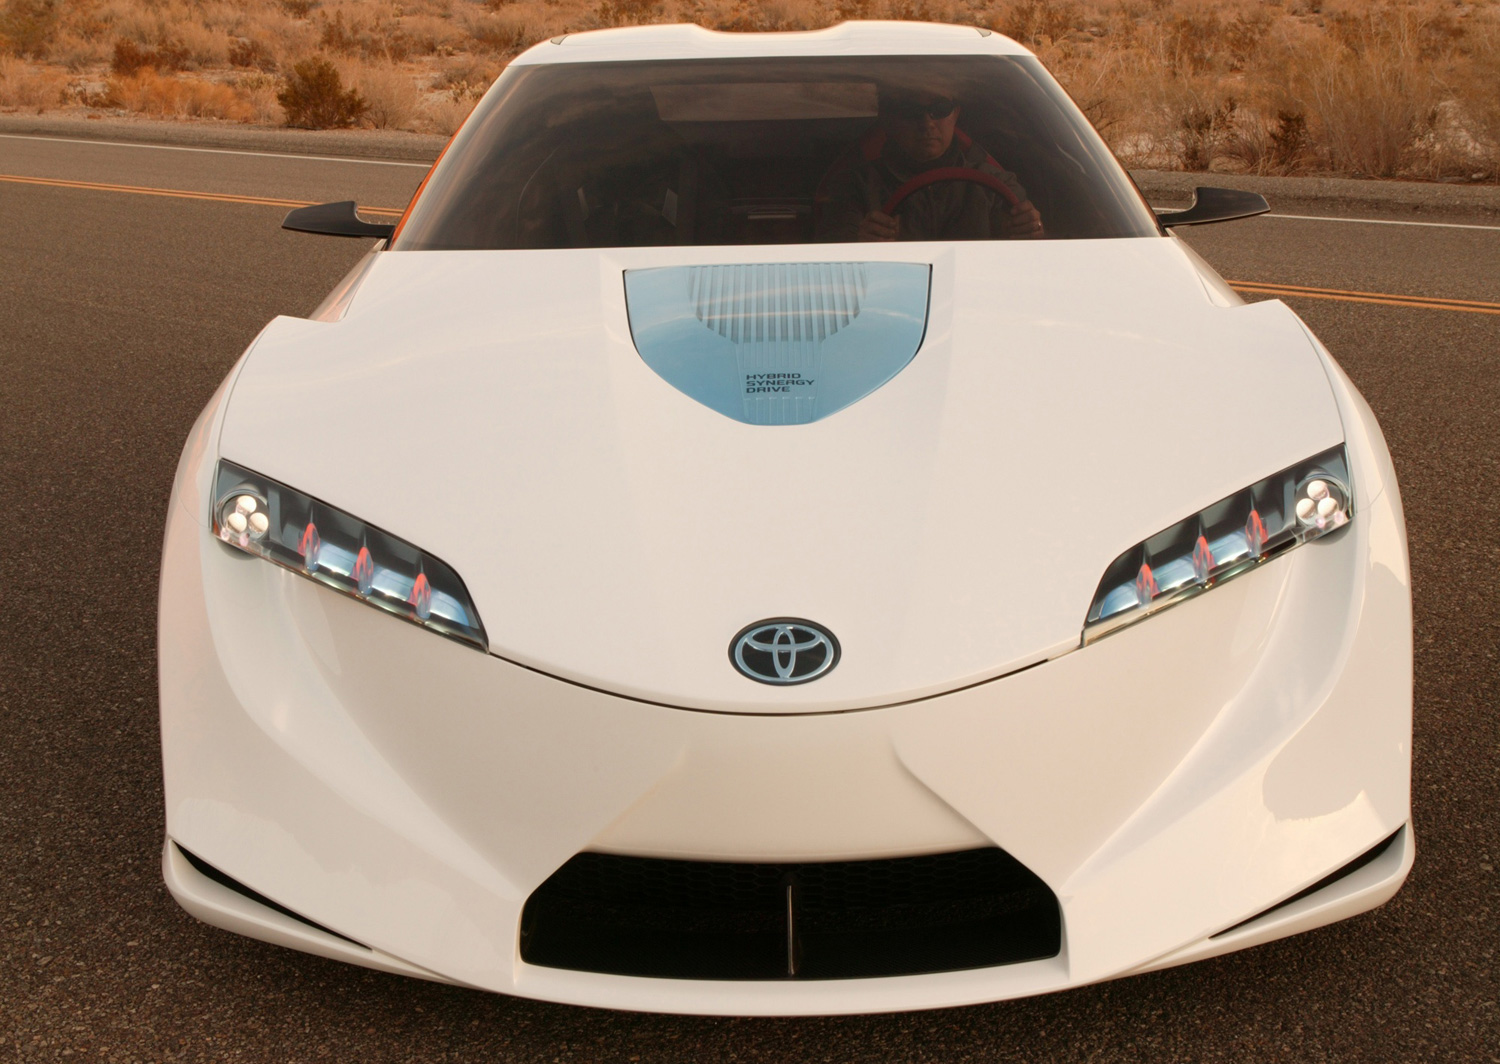 Toyota-FT-HS-concept-front-view.jpg